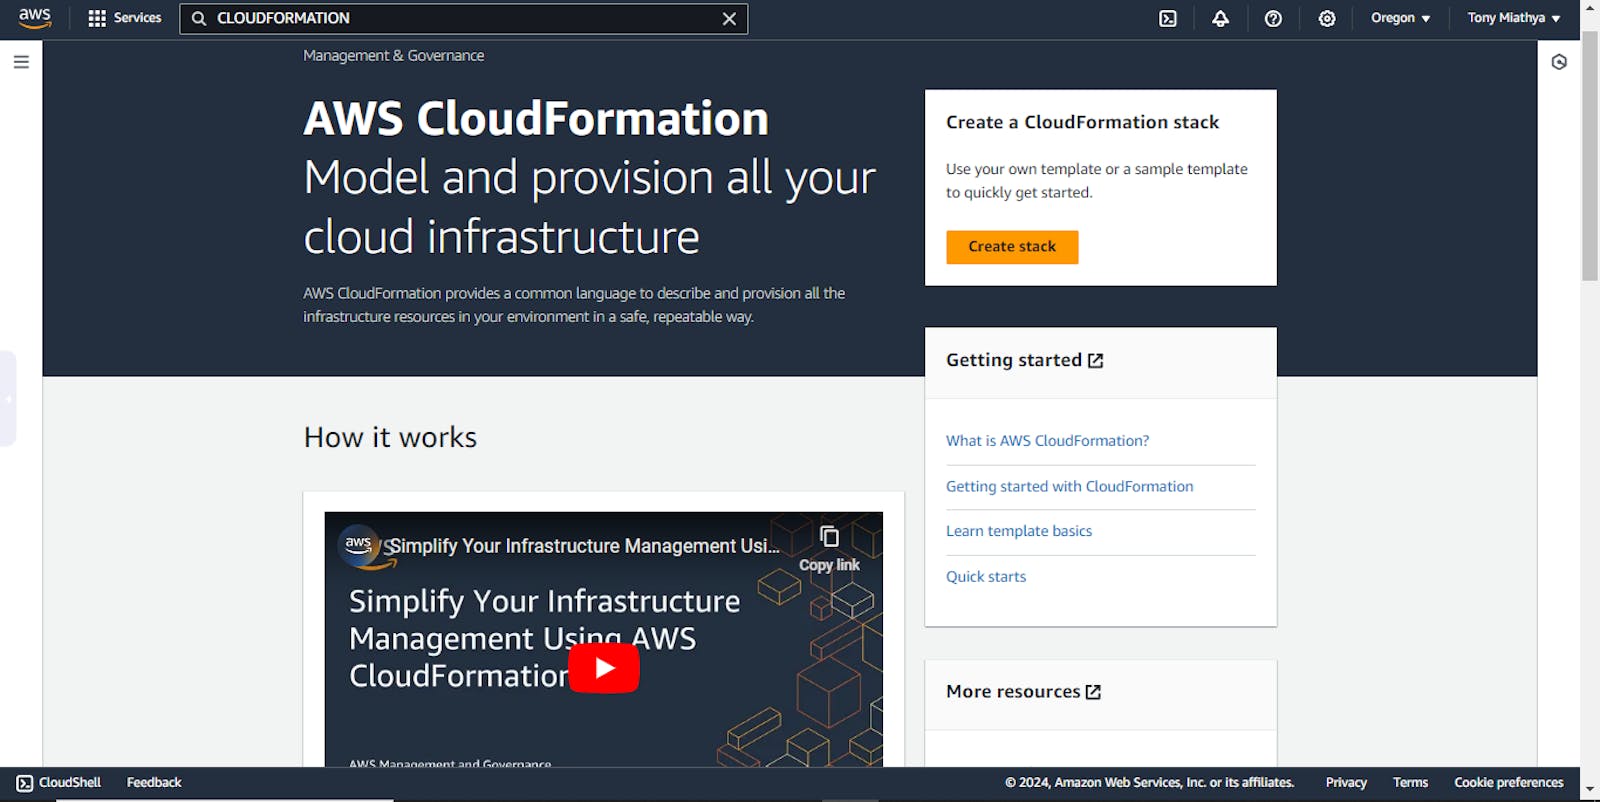 Uploading a Template on AWS CloudFormation